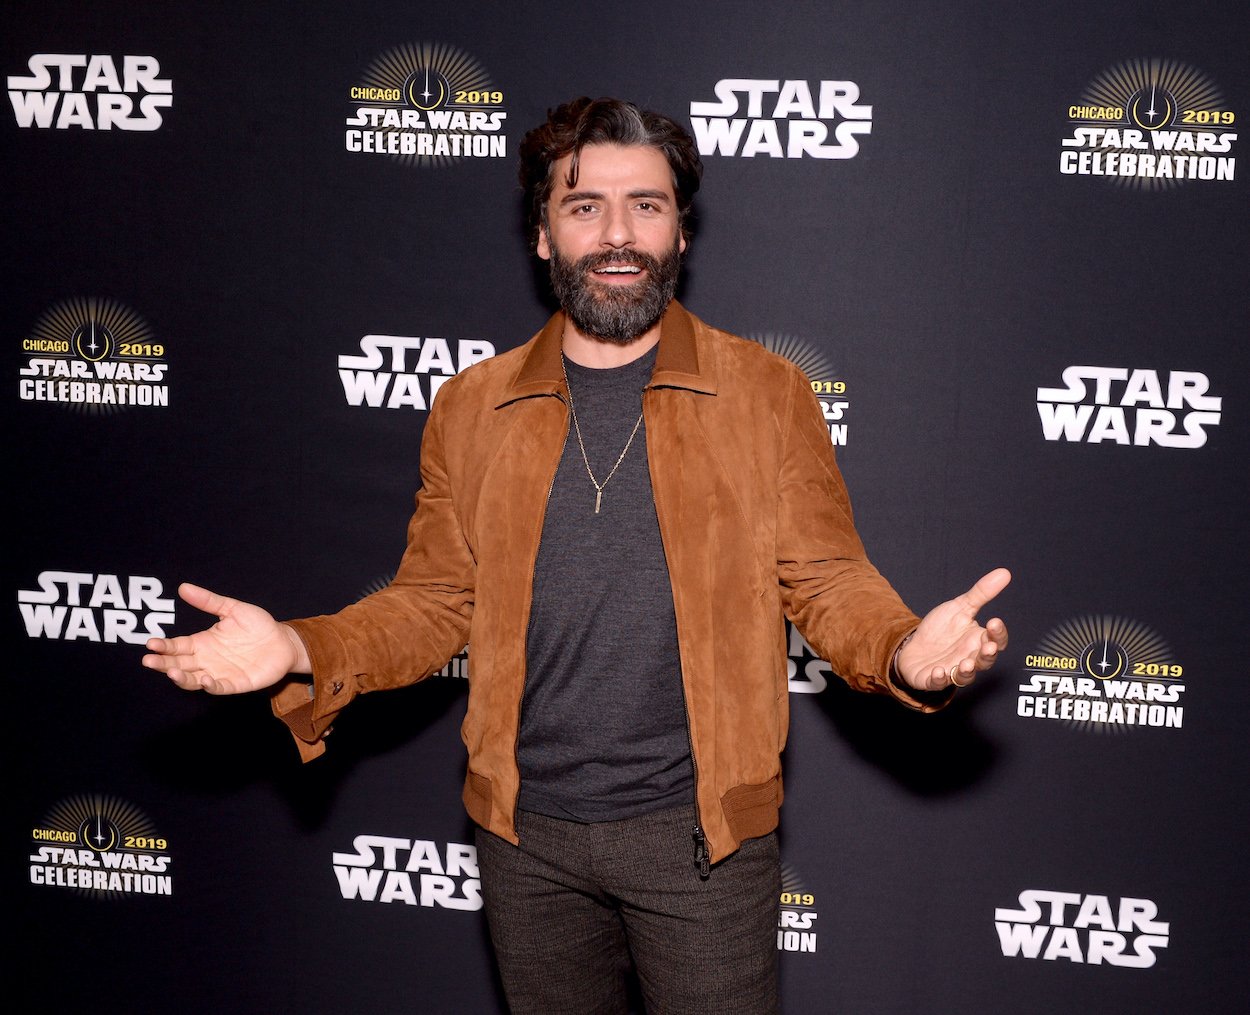 Oscar Isaac attends the 2019 'Star Wars' Celebration in Chicago. After once joking about playing Poe Dameron again, Isaac gave a serious answer about what it would take for him to make his 'Star Wars' return.